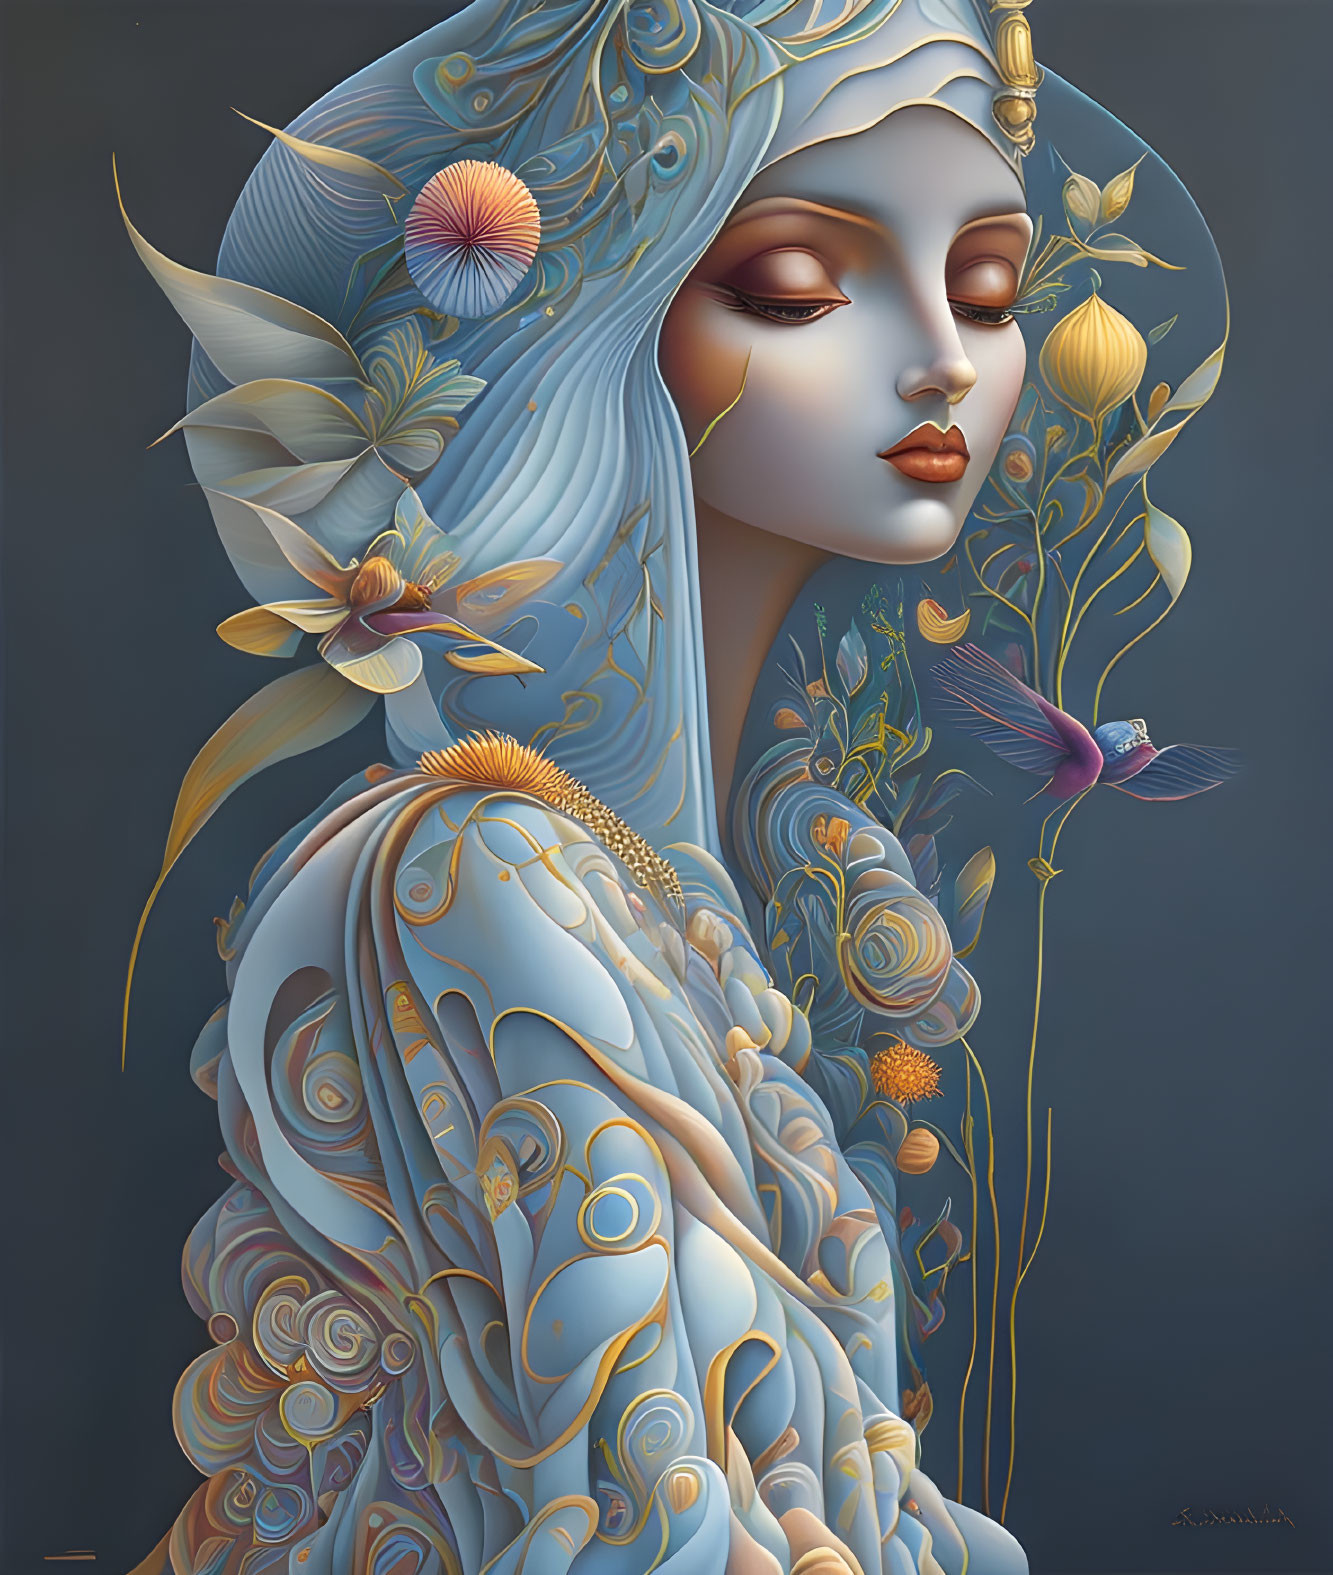 Stylized woman illustration with floral patterns in cool blue tones